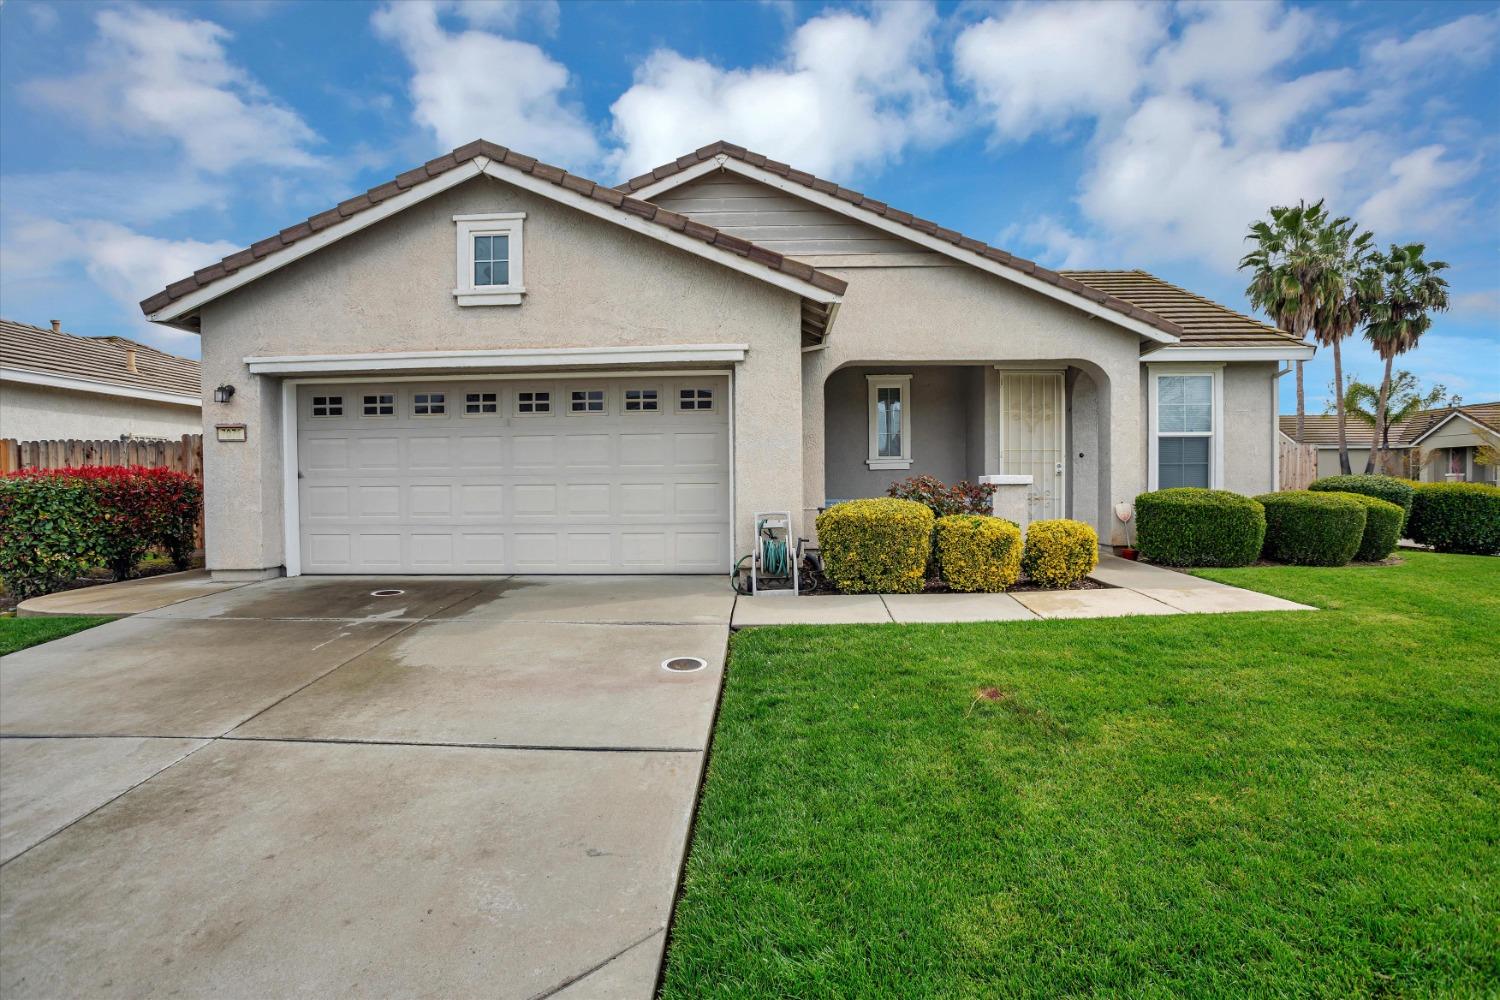 Photo of 7971 Roseview Wy in Sacramento, CA